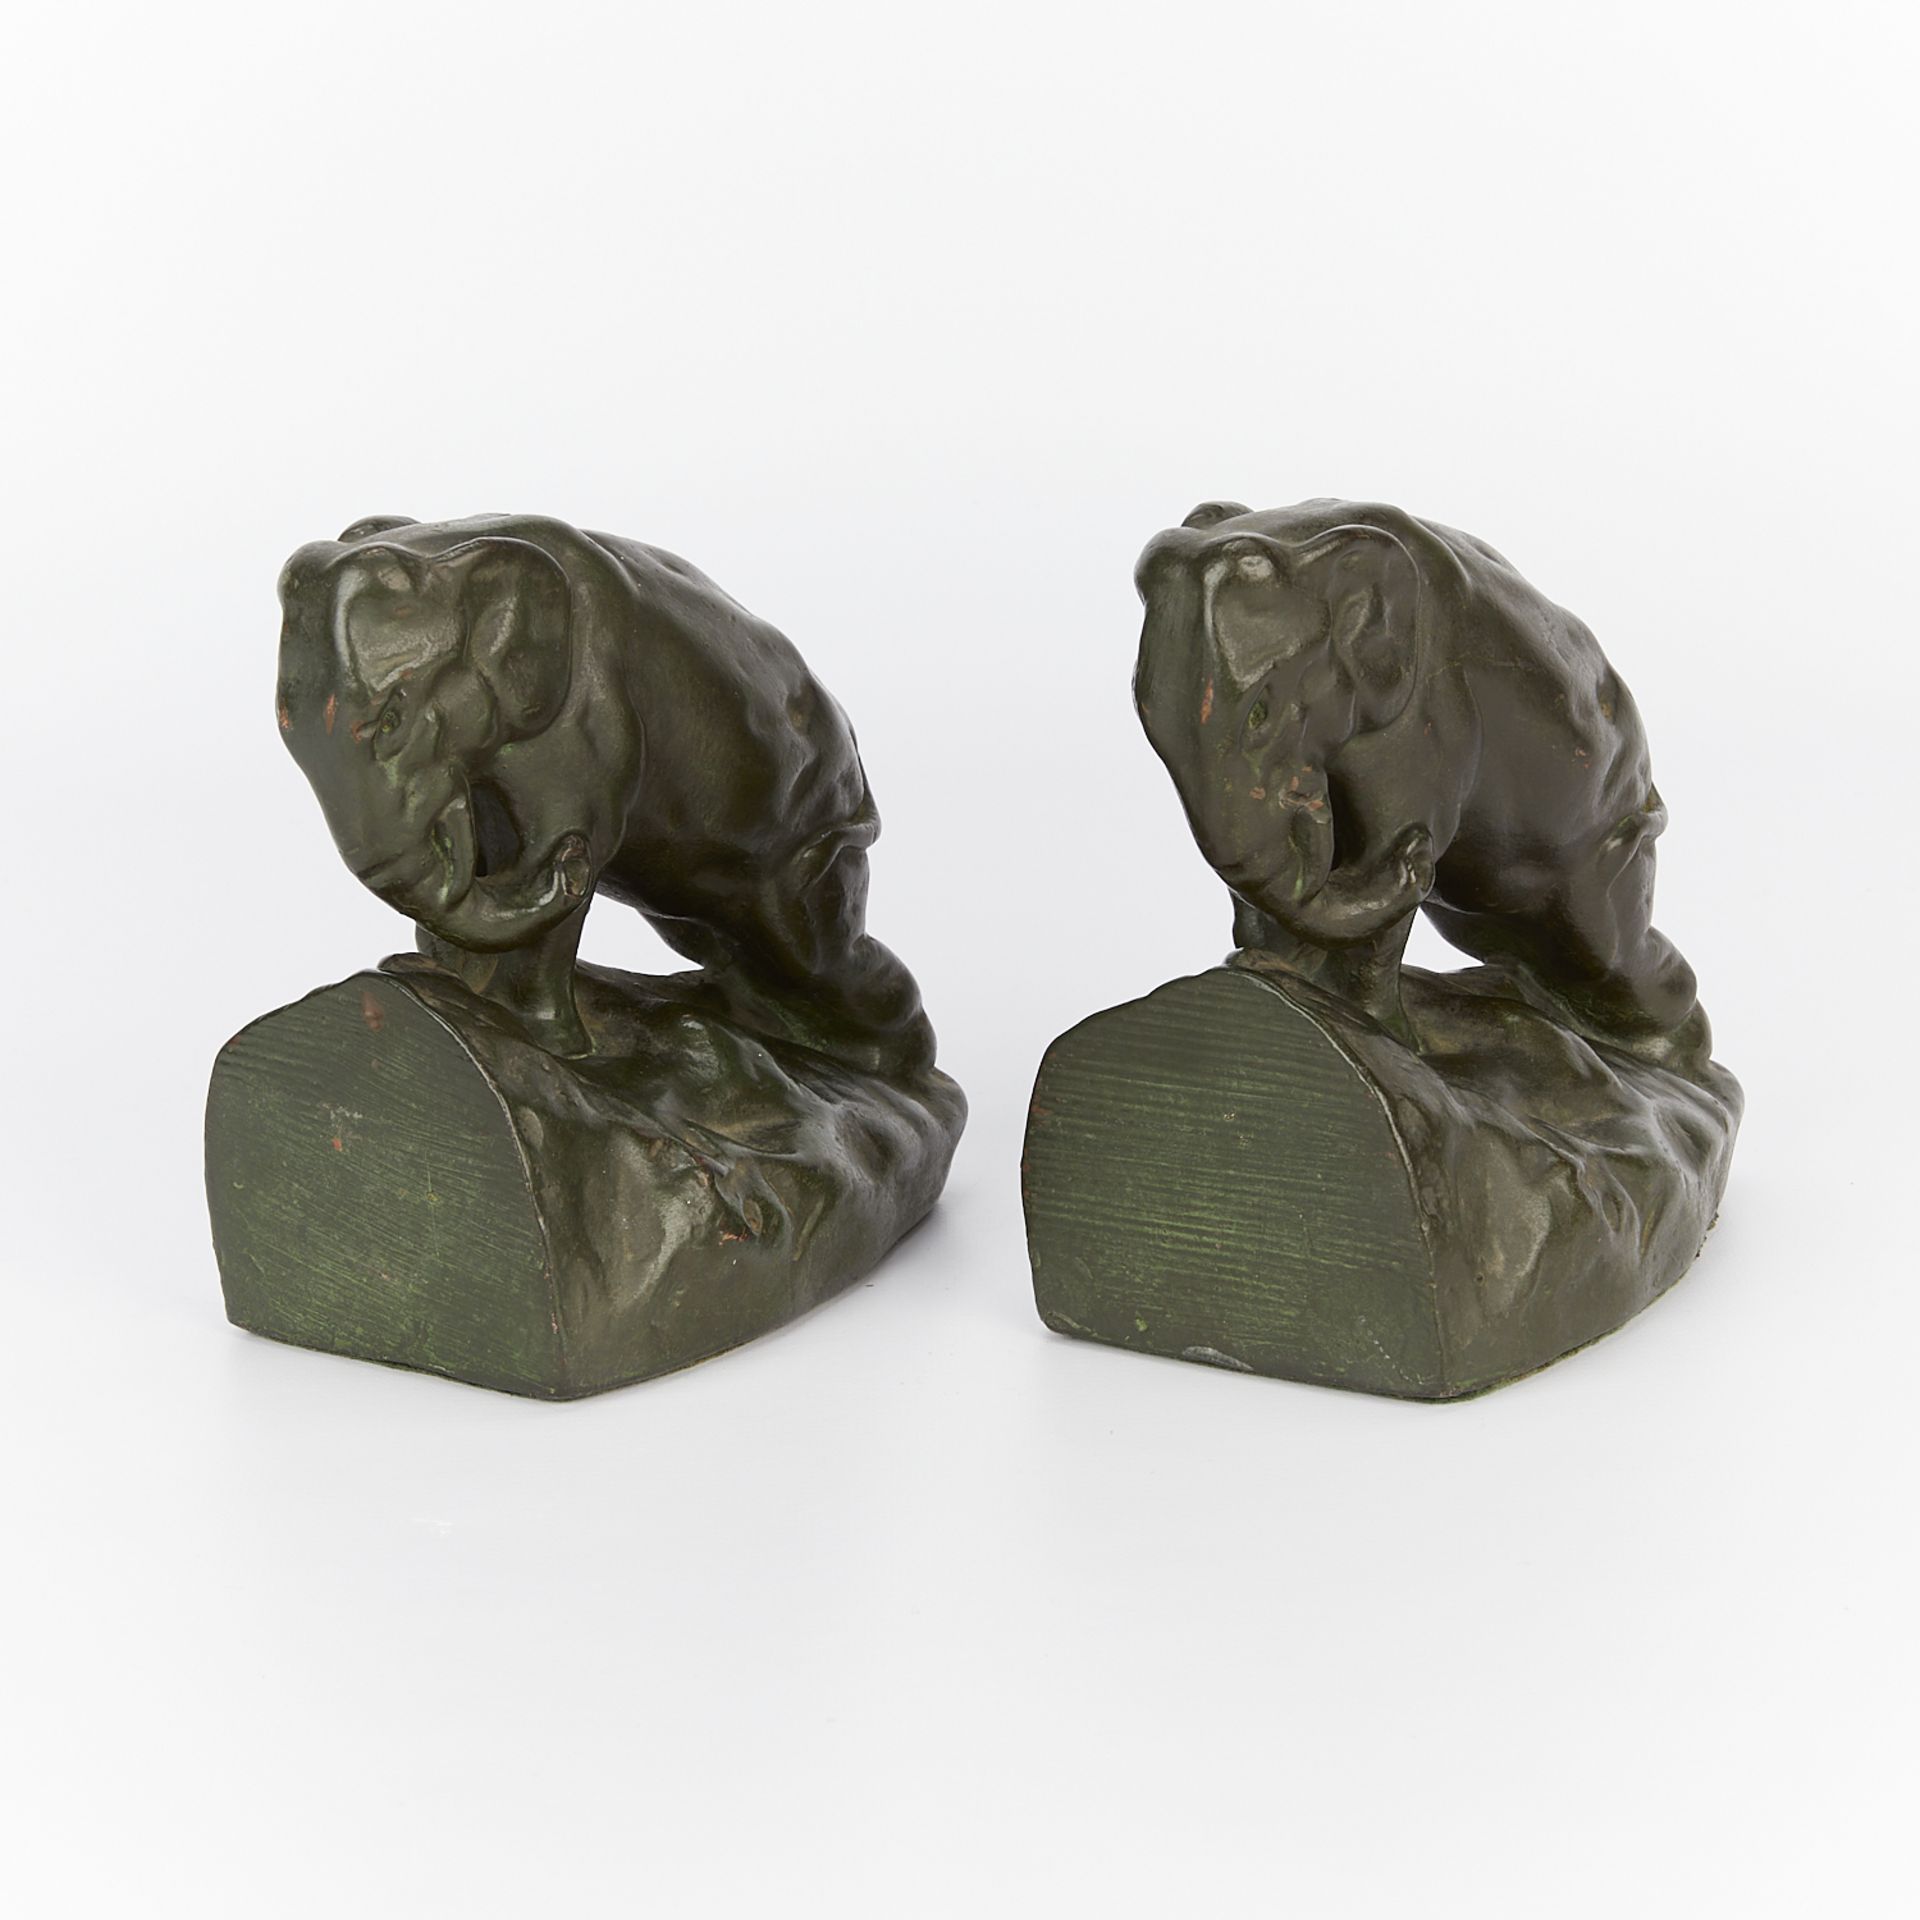 Pair of Bronze or Copper Elephant Bookends - Image 2 of 11